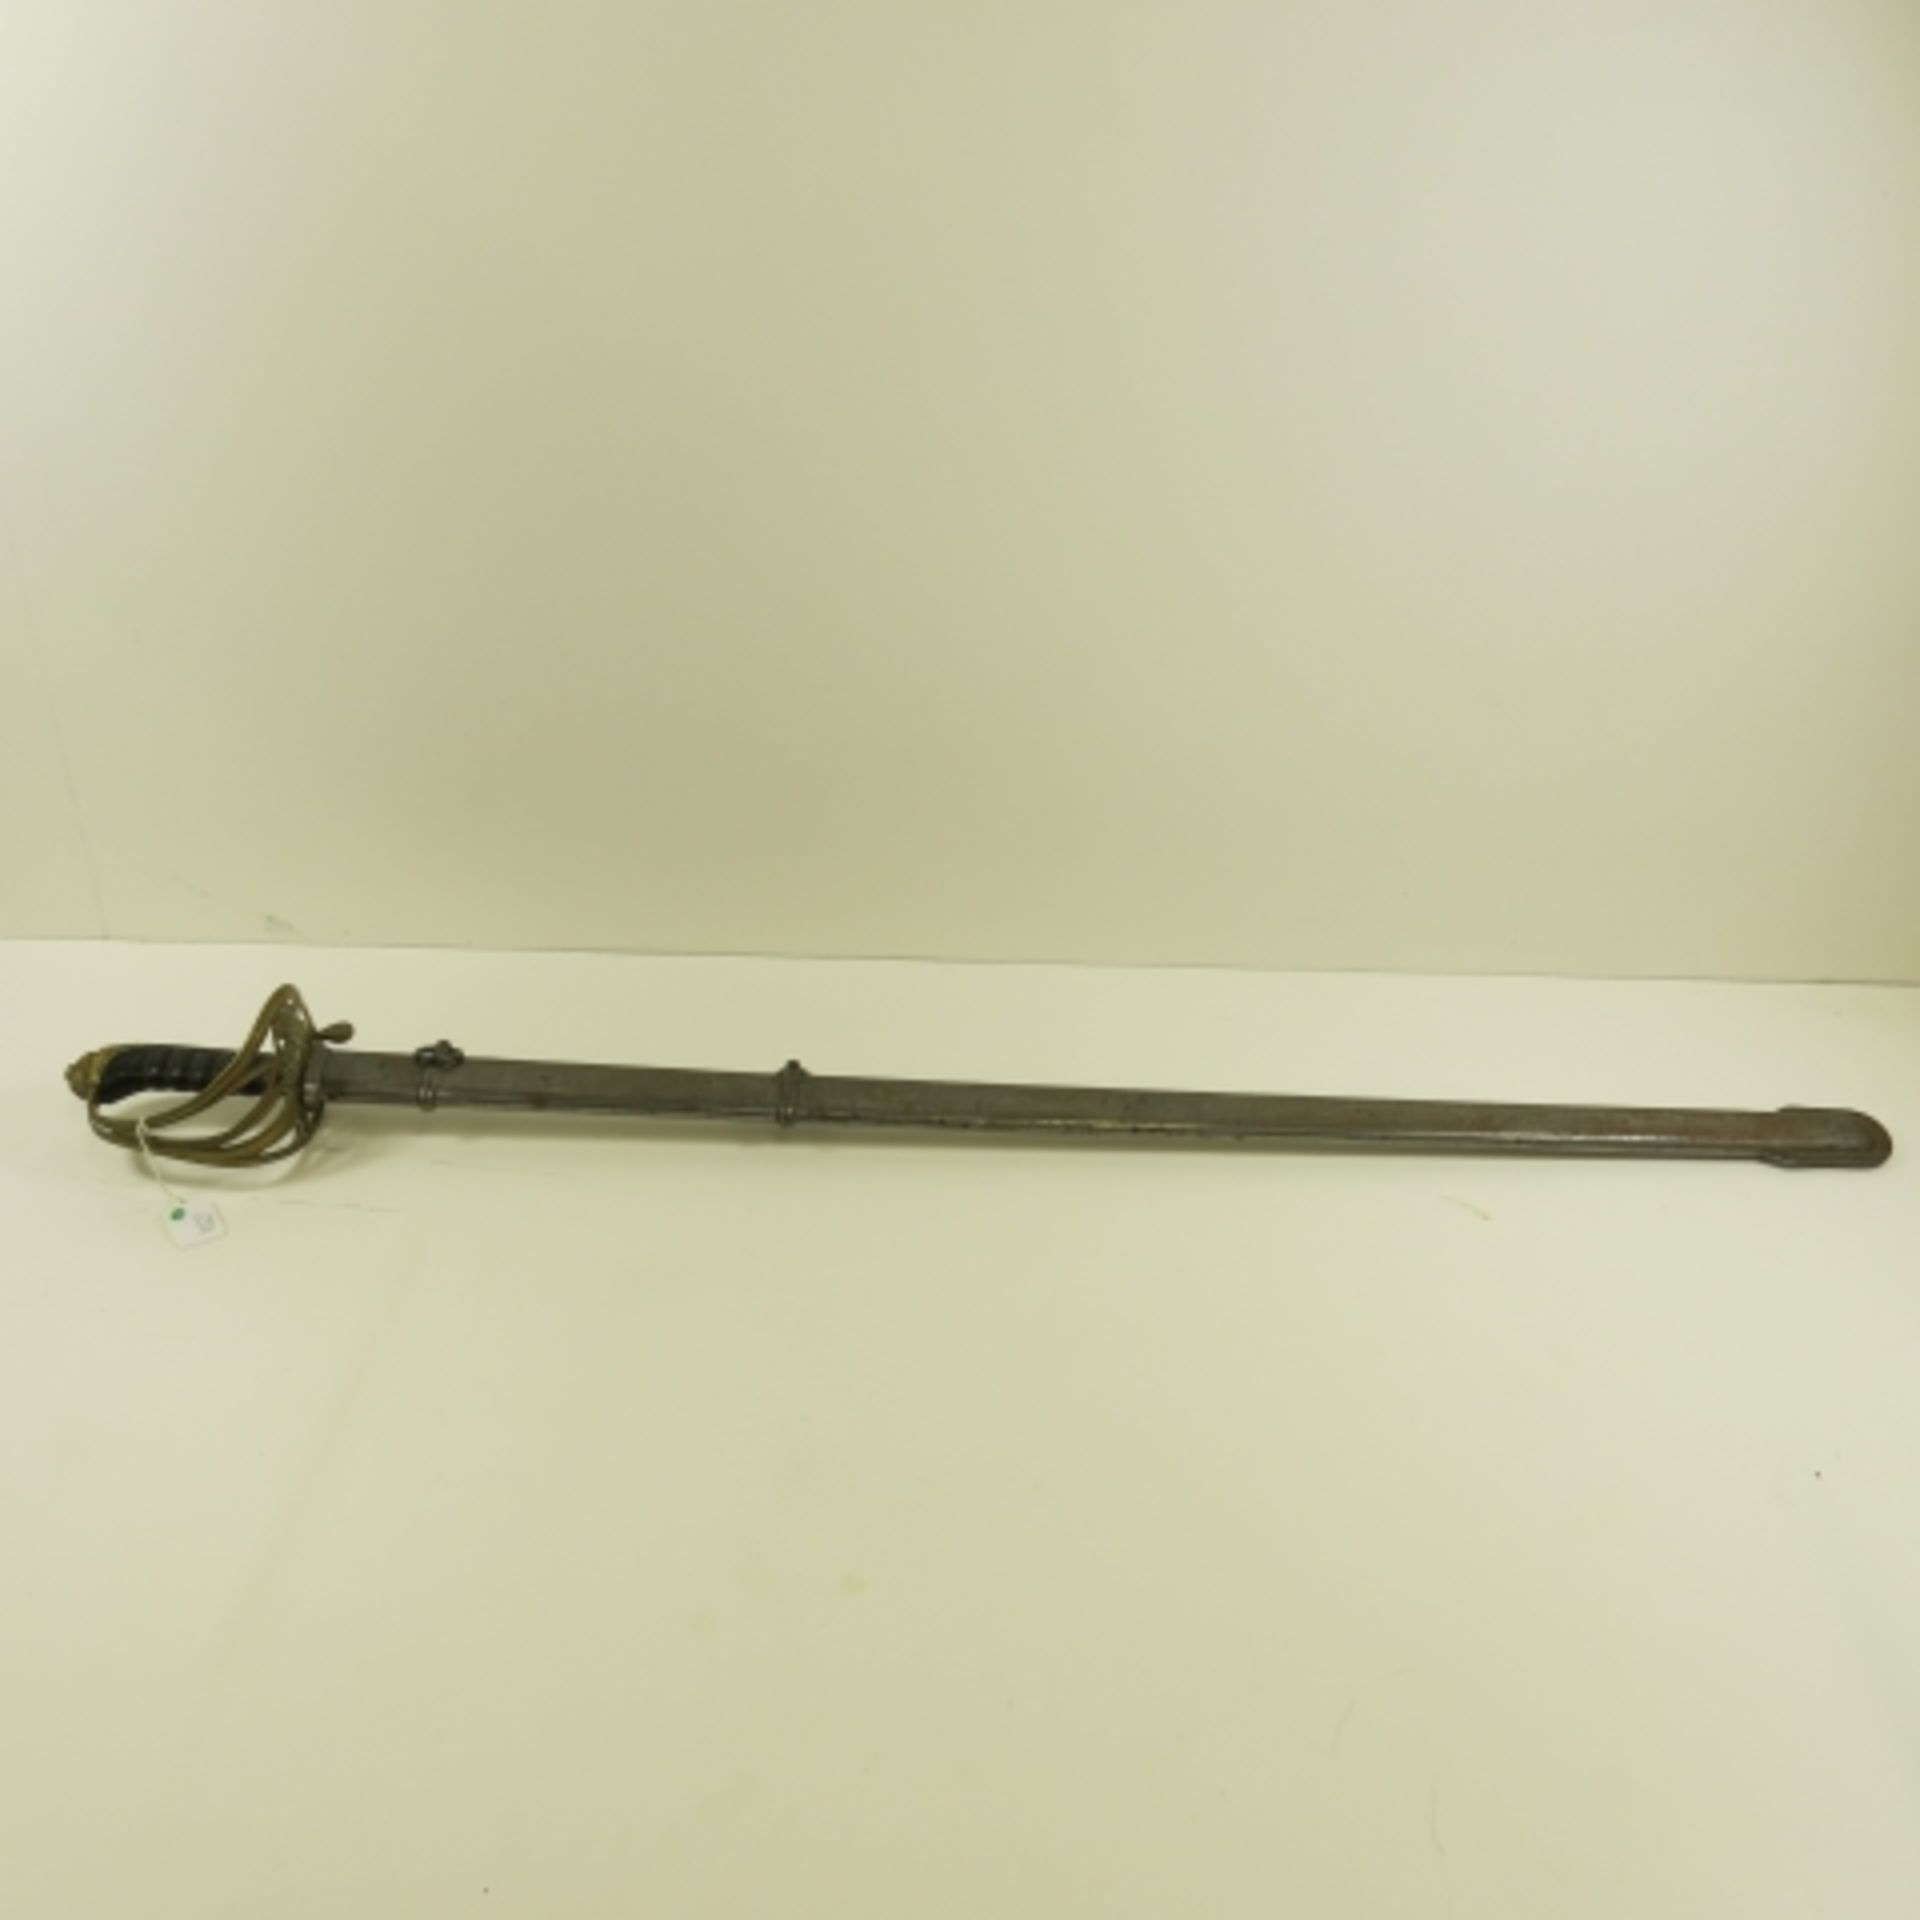 A VR Infantry Sword with plain blade. The 1892 (?) pattern British Victorian Infantry sword with '